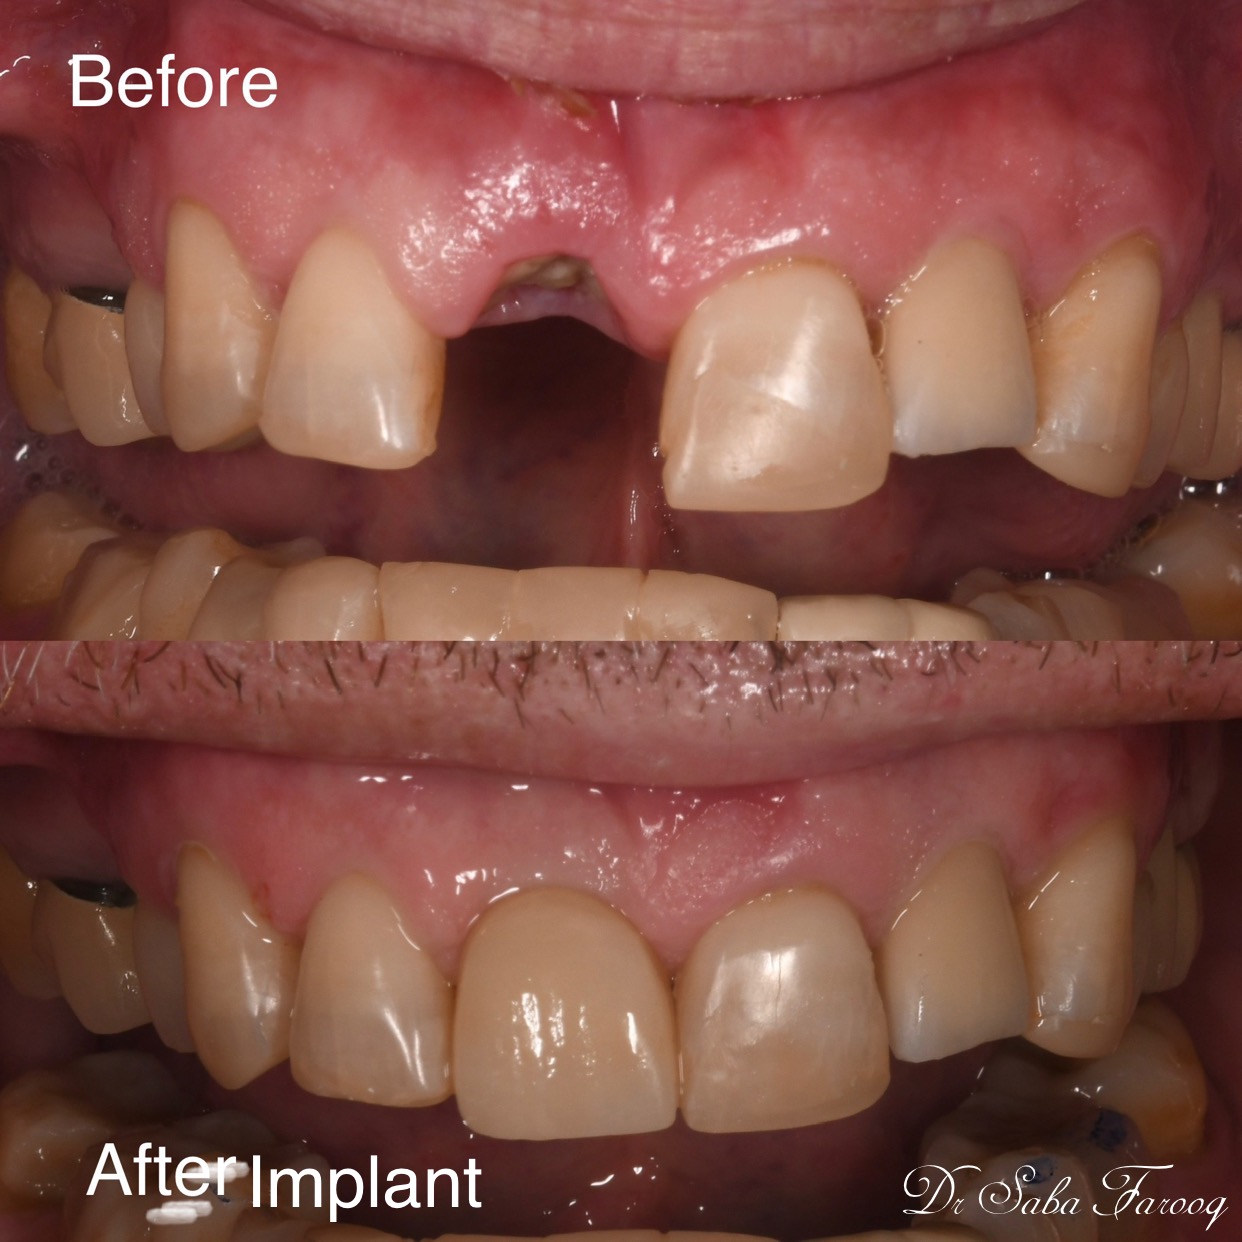 A before and after picture of a dental implant.